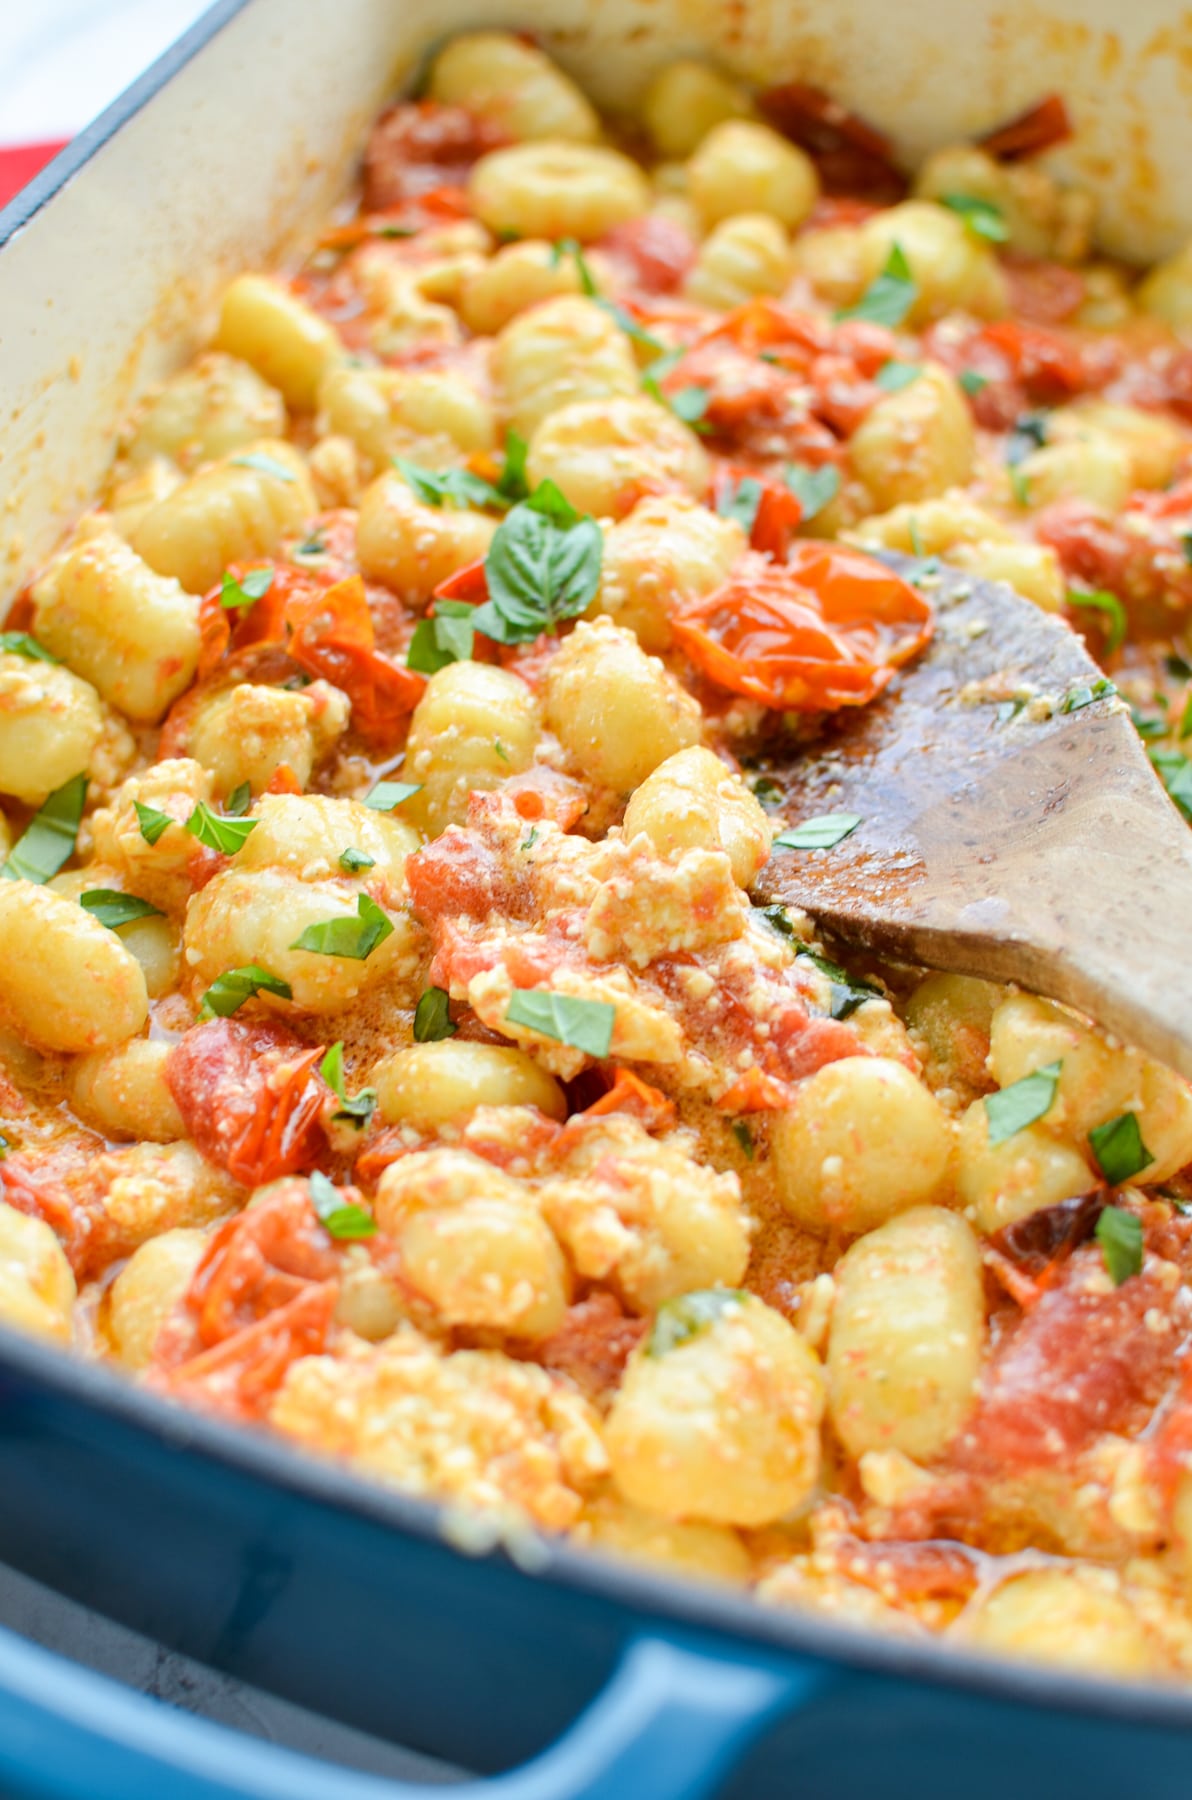 A close up of a dish of gnocchi pasta tossed with a cherry tomato and basil sauce.